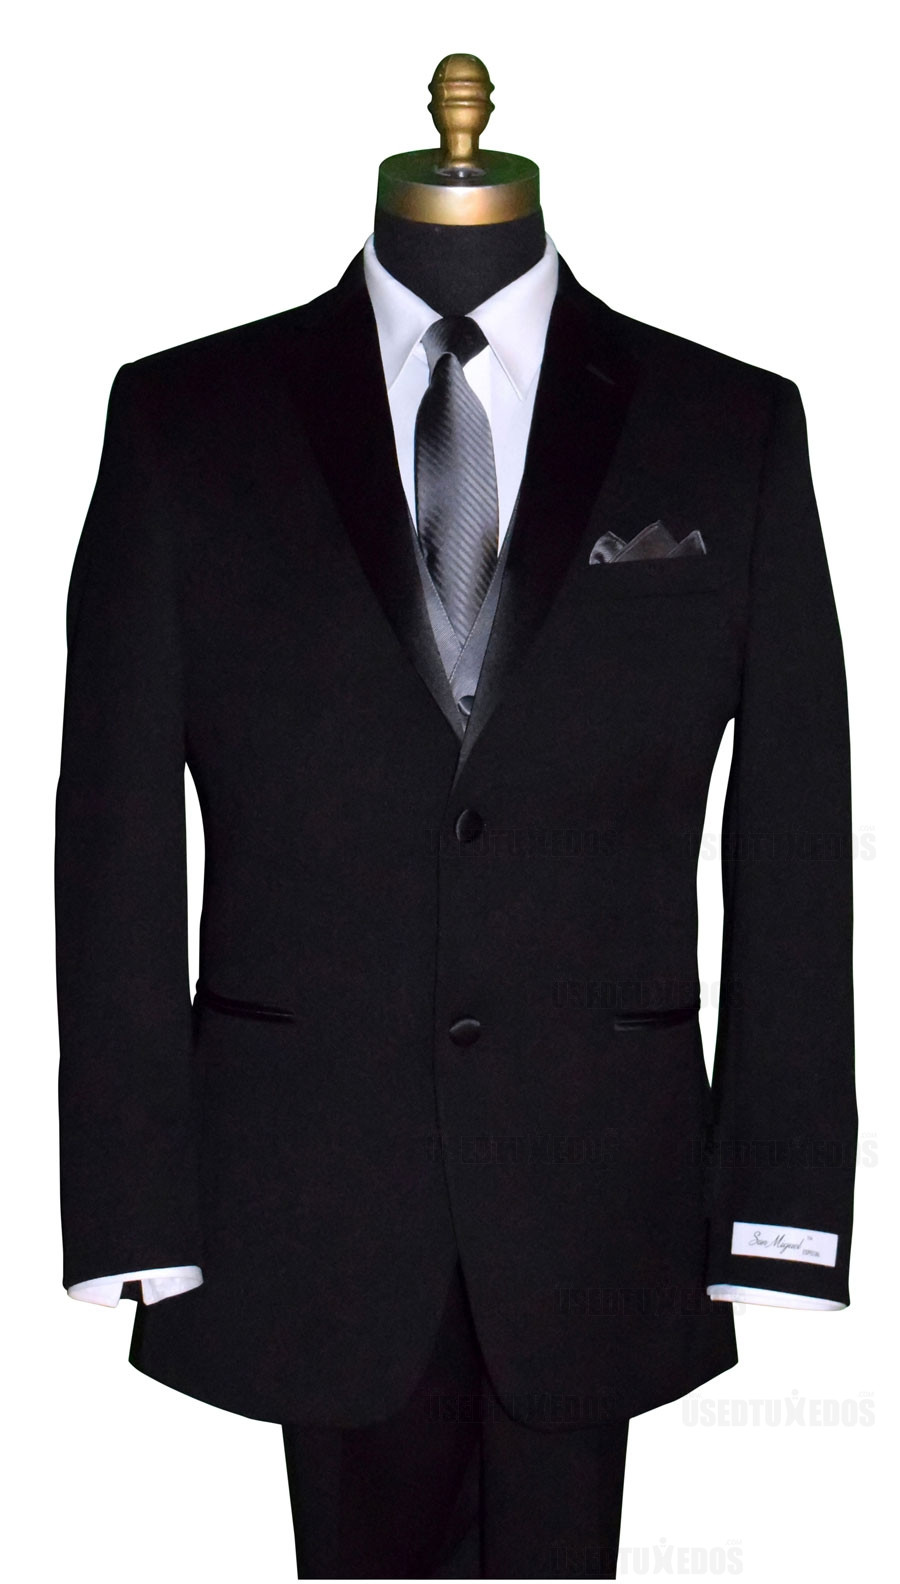 men's black tuxedo with charcoal striped tie and charcoal vest